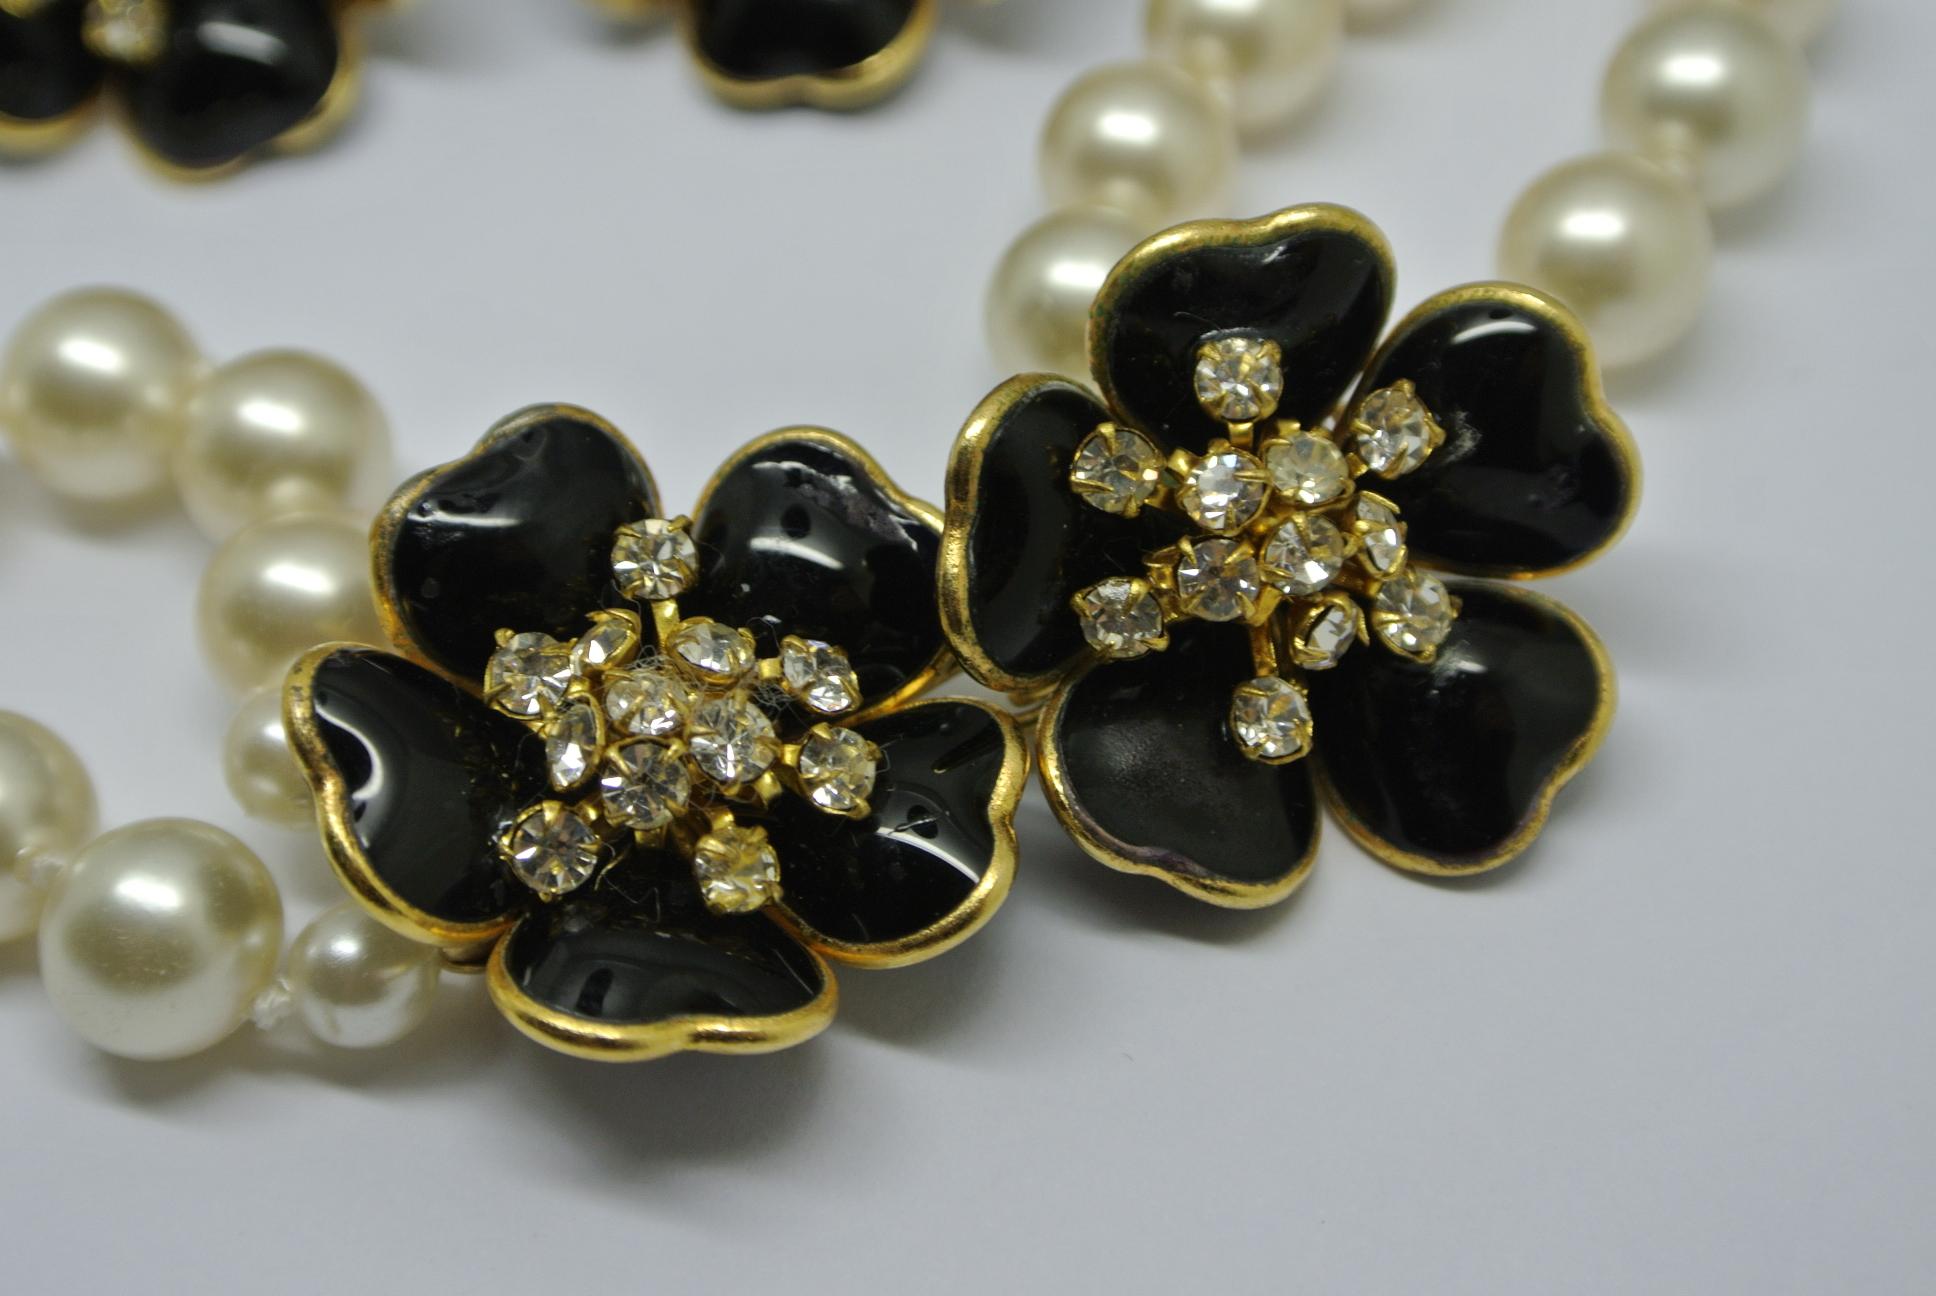 This set is made by Gripoix workshop for Chanel
Comes with black flower
Each flower is 1 inch diameter